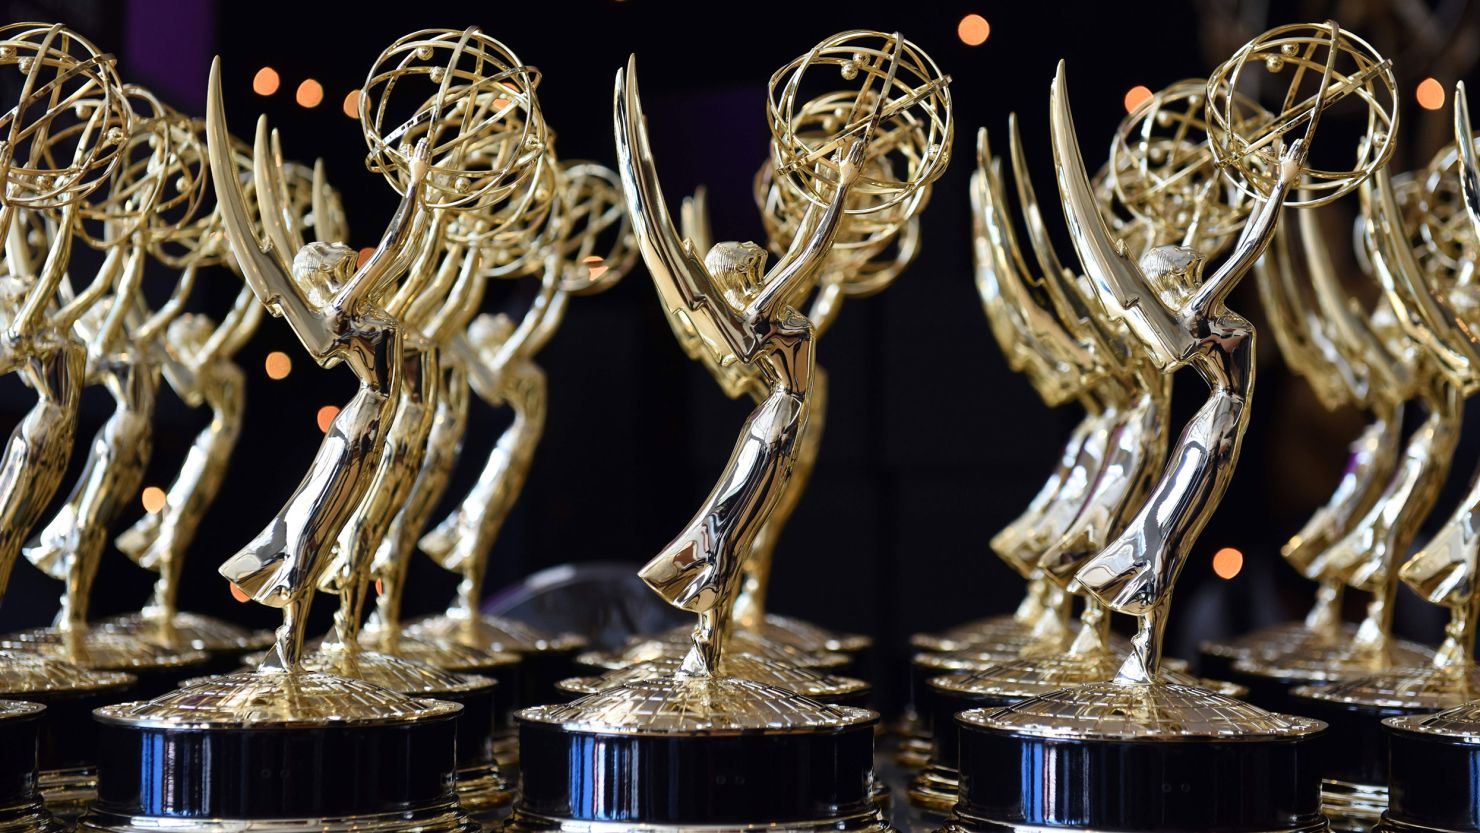 ‘Succession’ and ‘The Last of Us’ lead Emmy nominations CNN